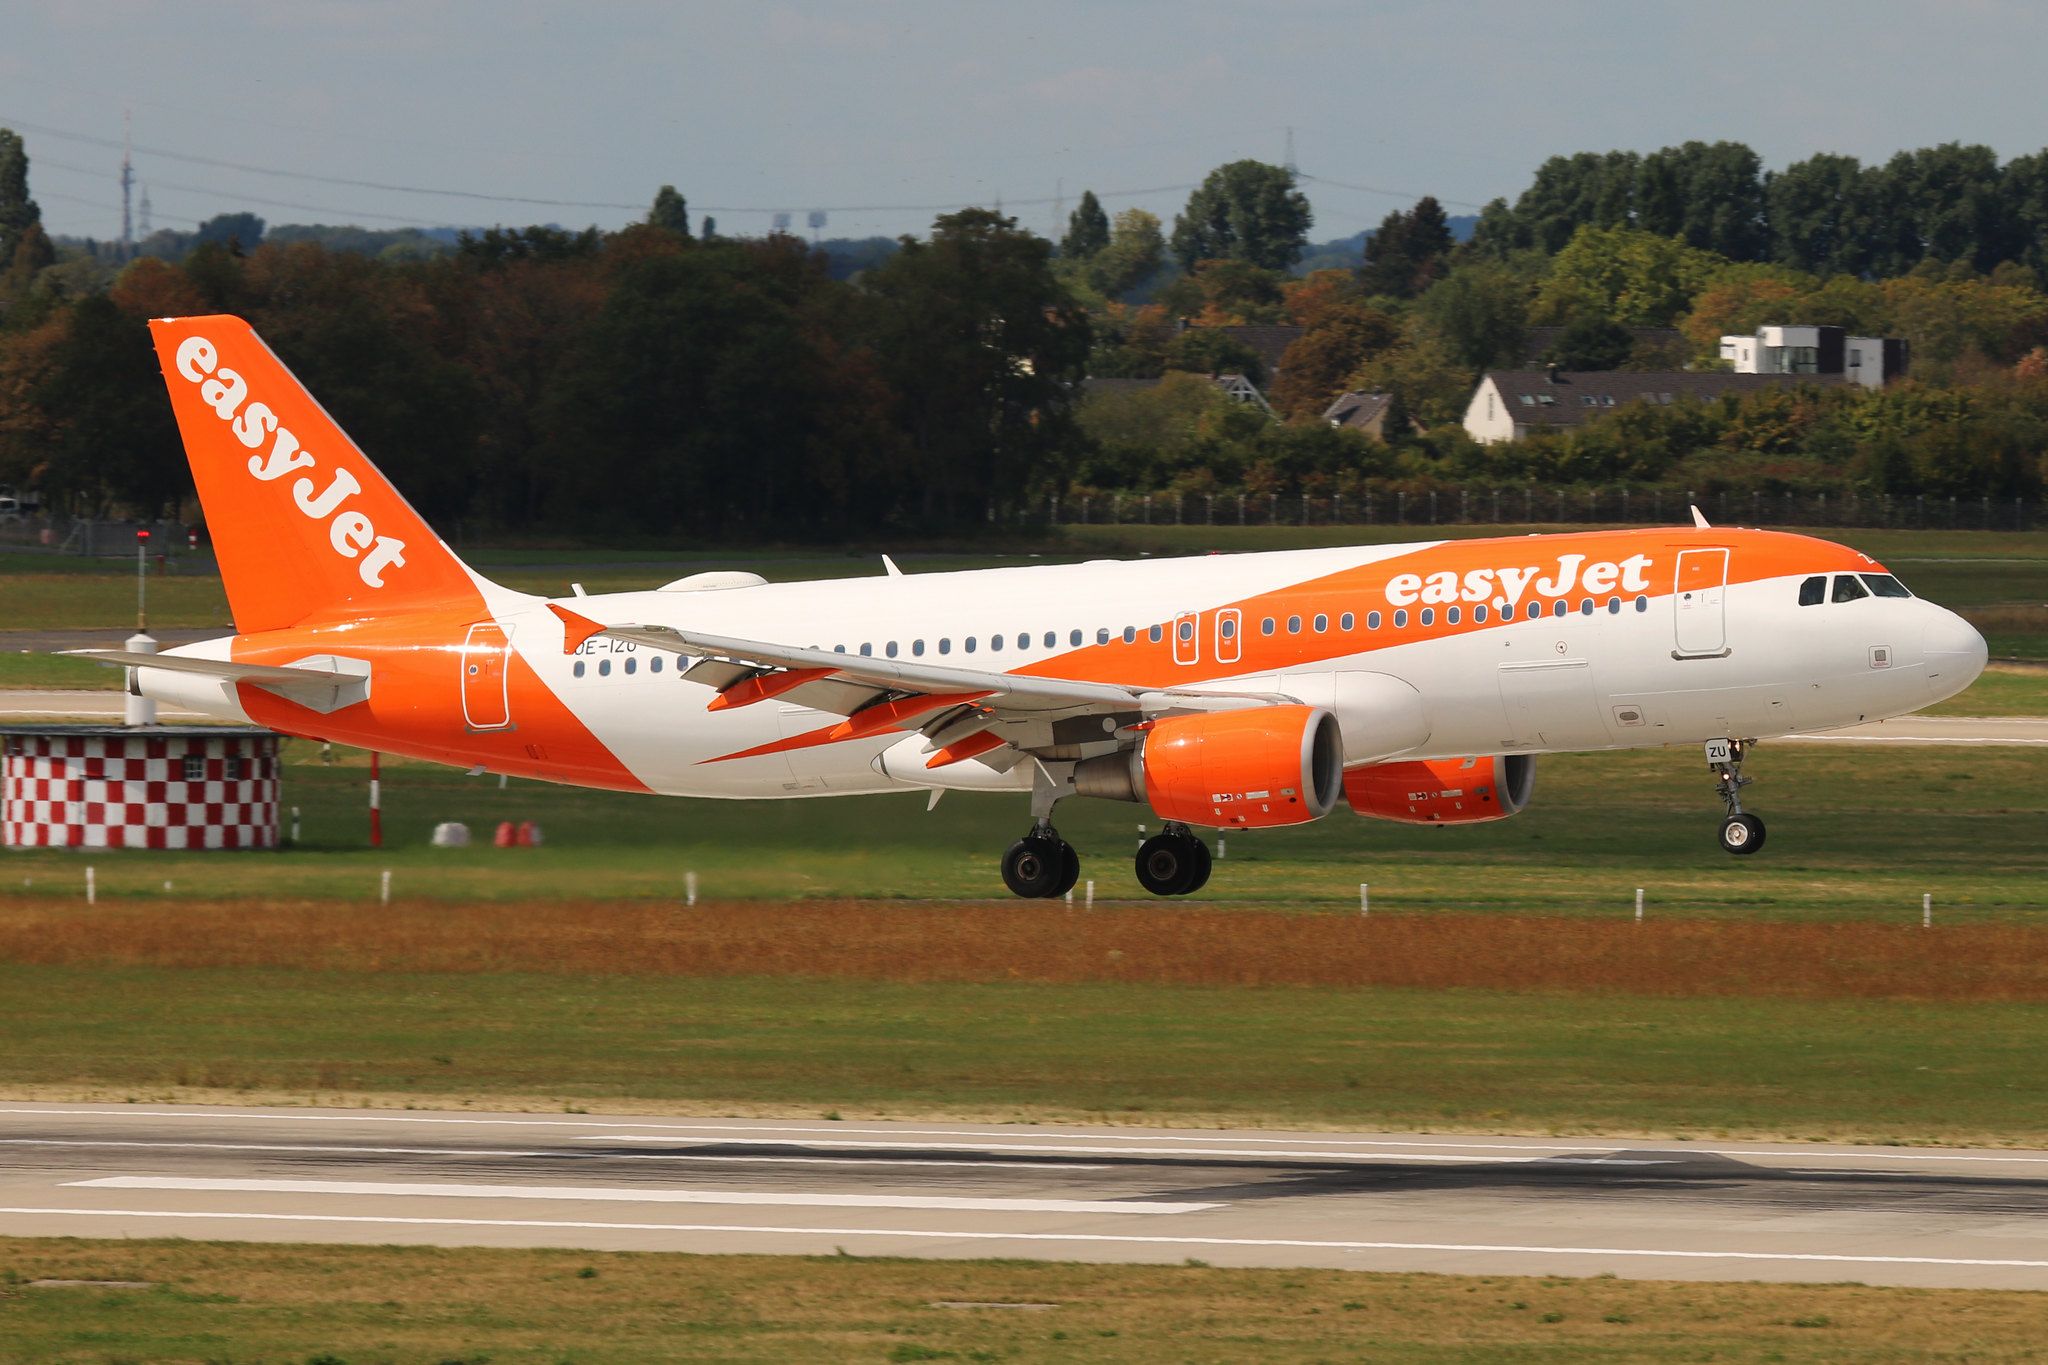 easyJet Airbus A320 about to touch down